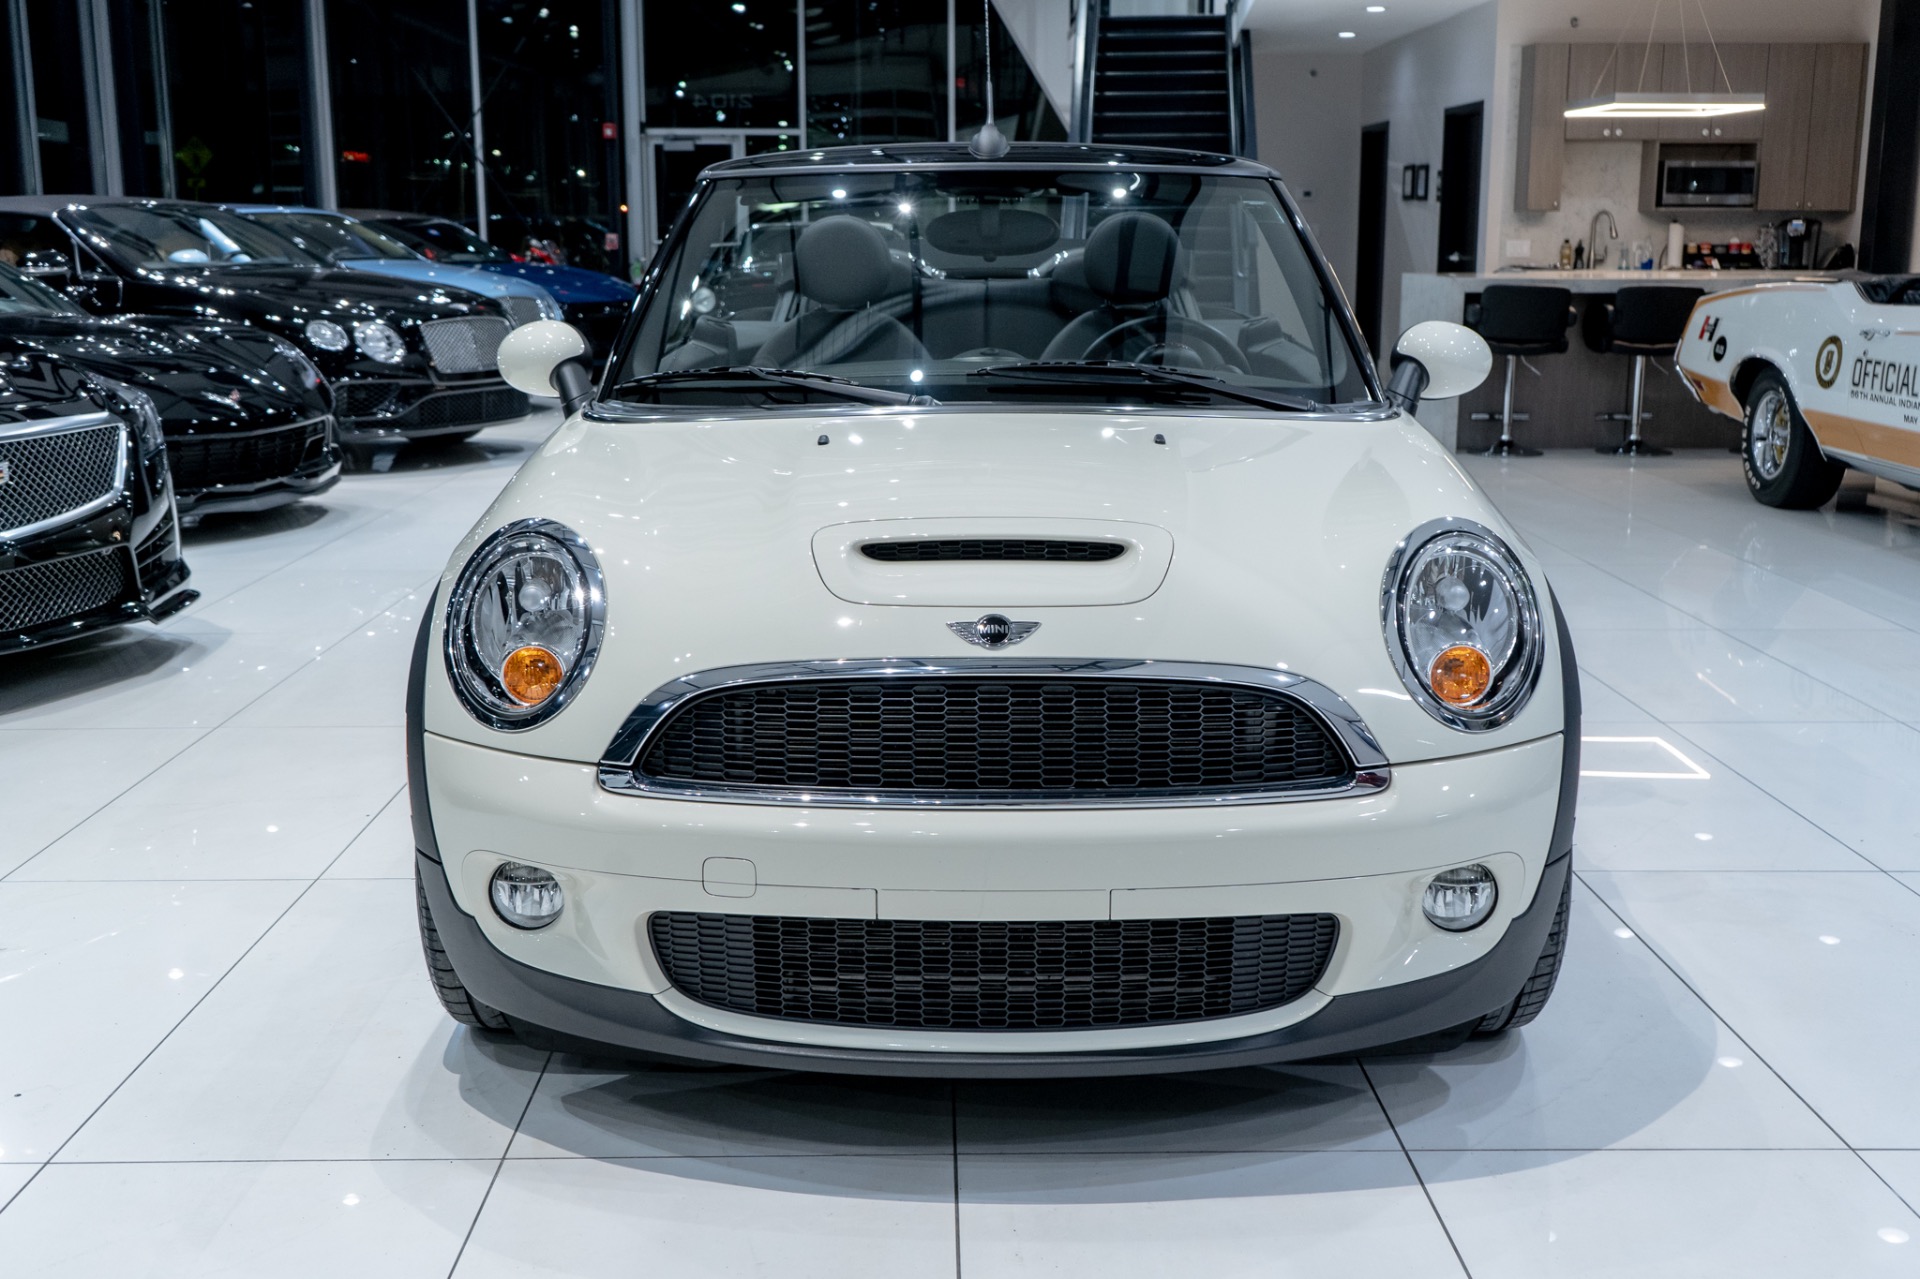 Used 2010 MINI Cooper S Convertible Turbocharged ONLY 16K Miles